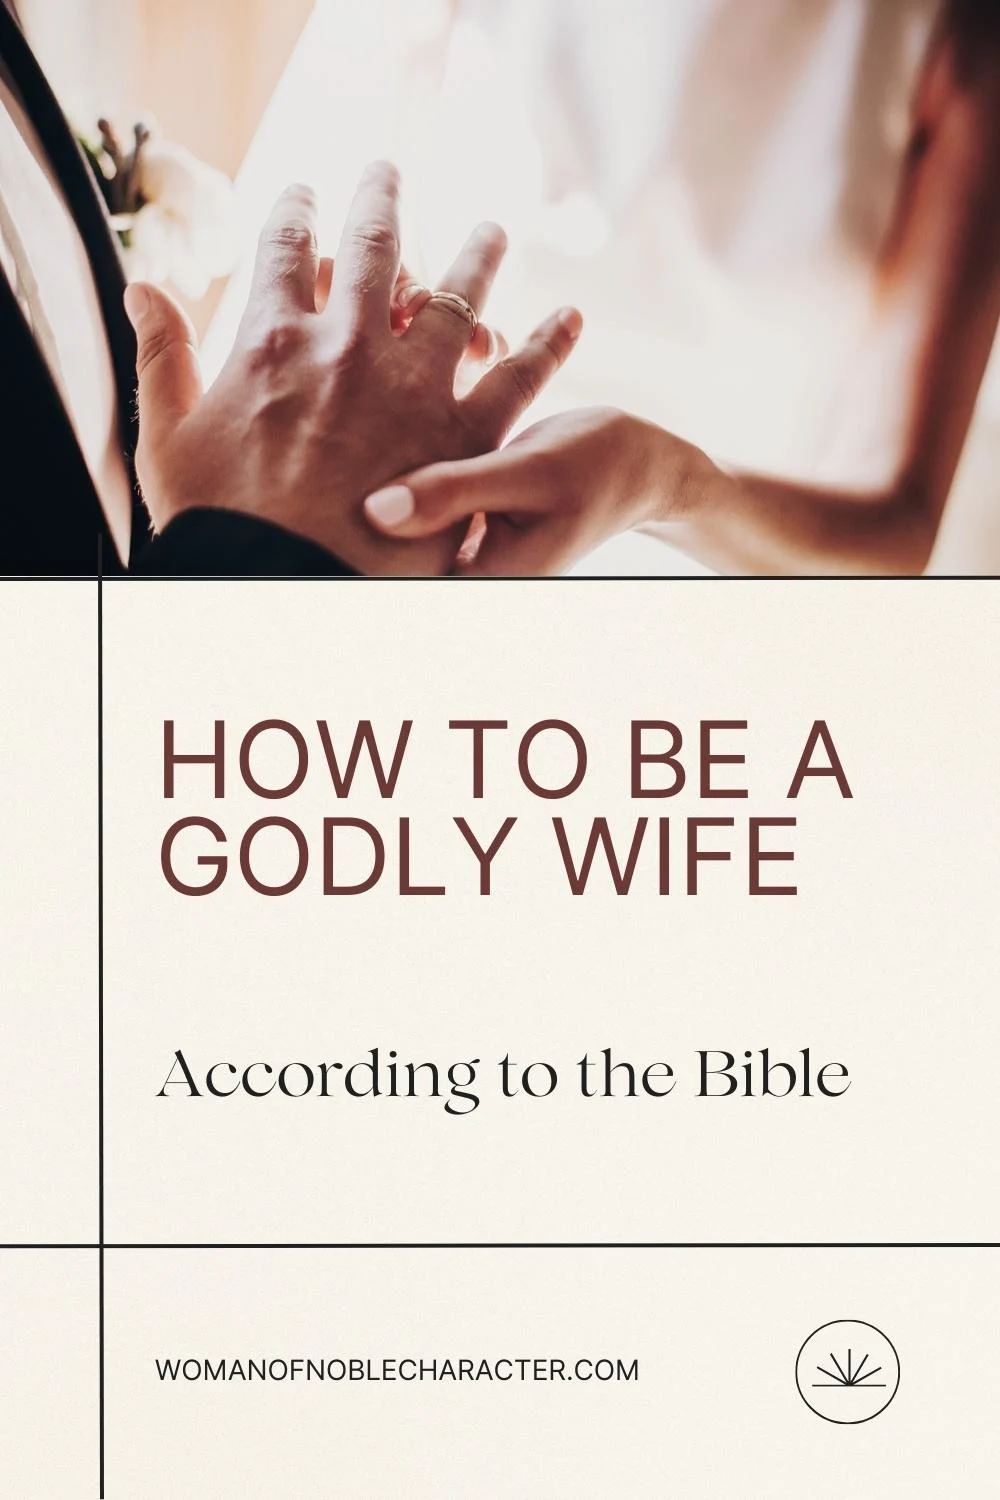 image of woman placing wedding band on husband's hand for the post how to be a godly wife